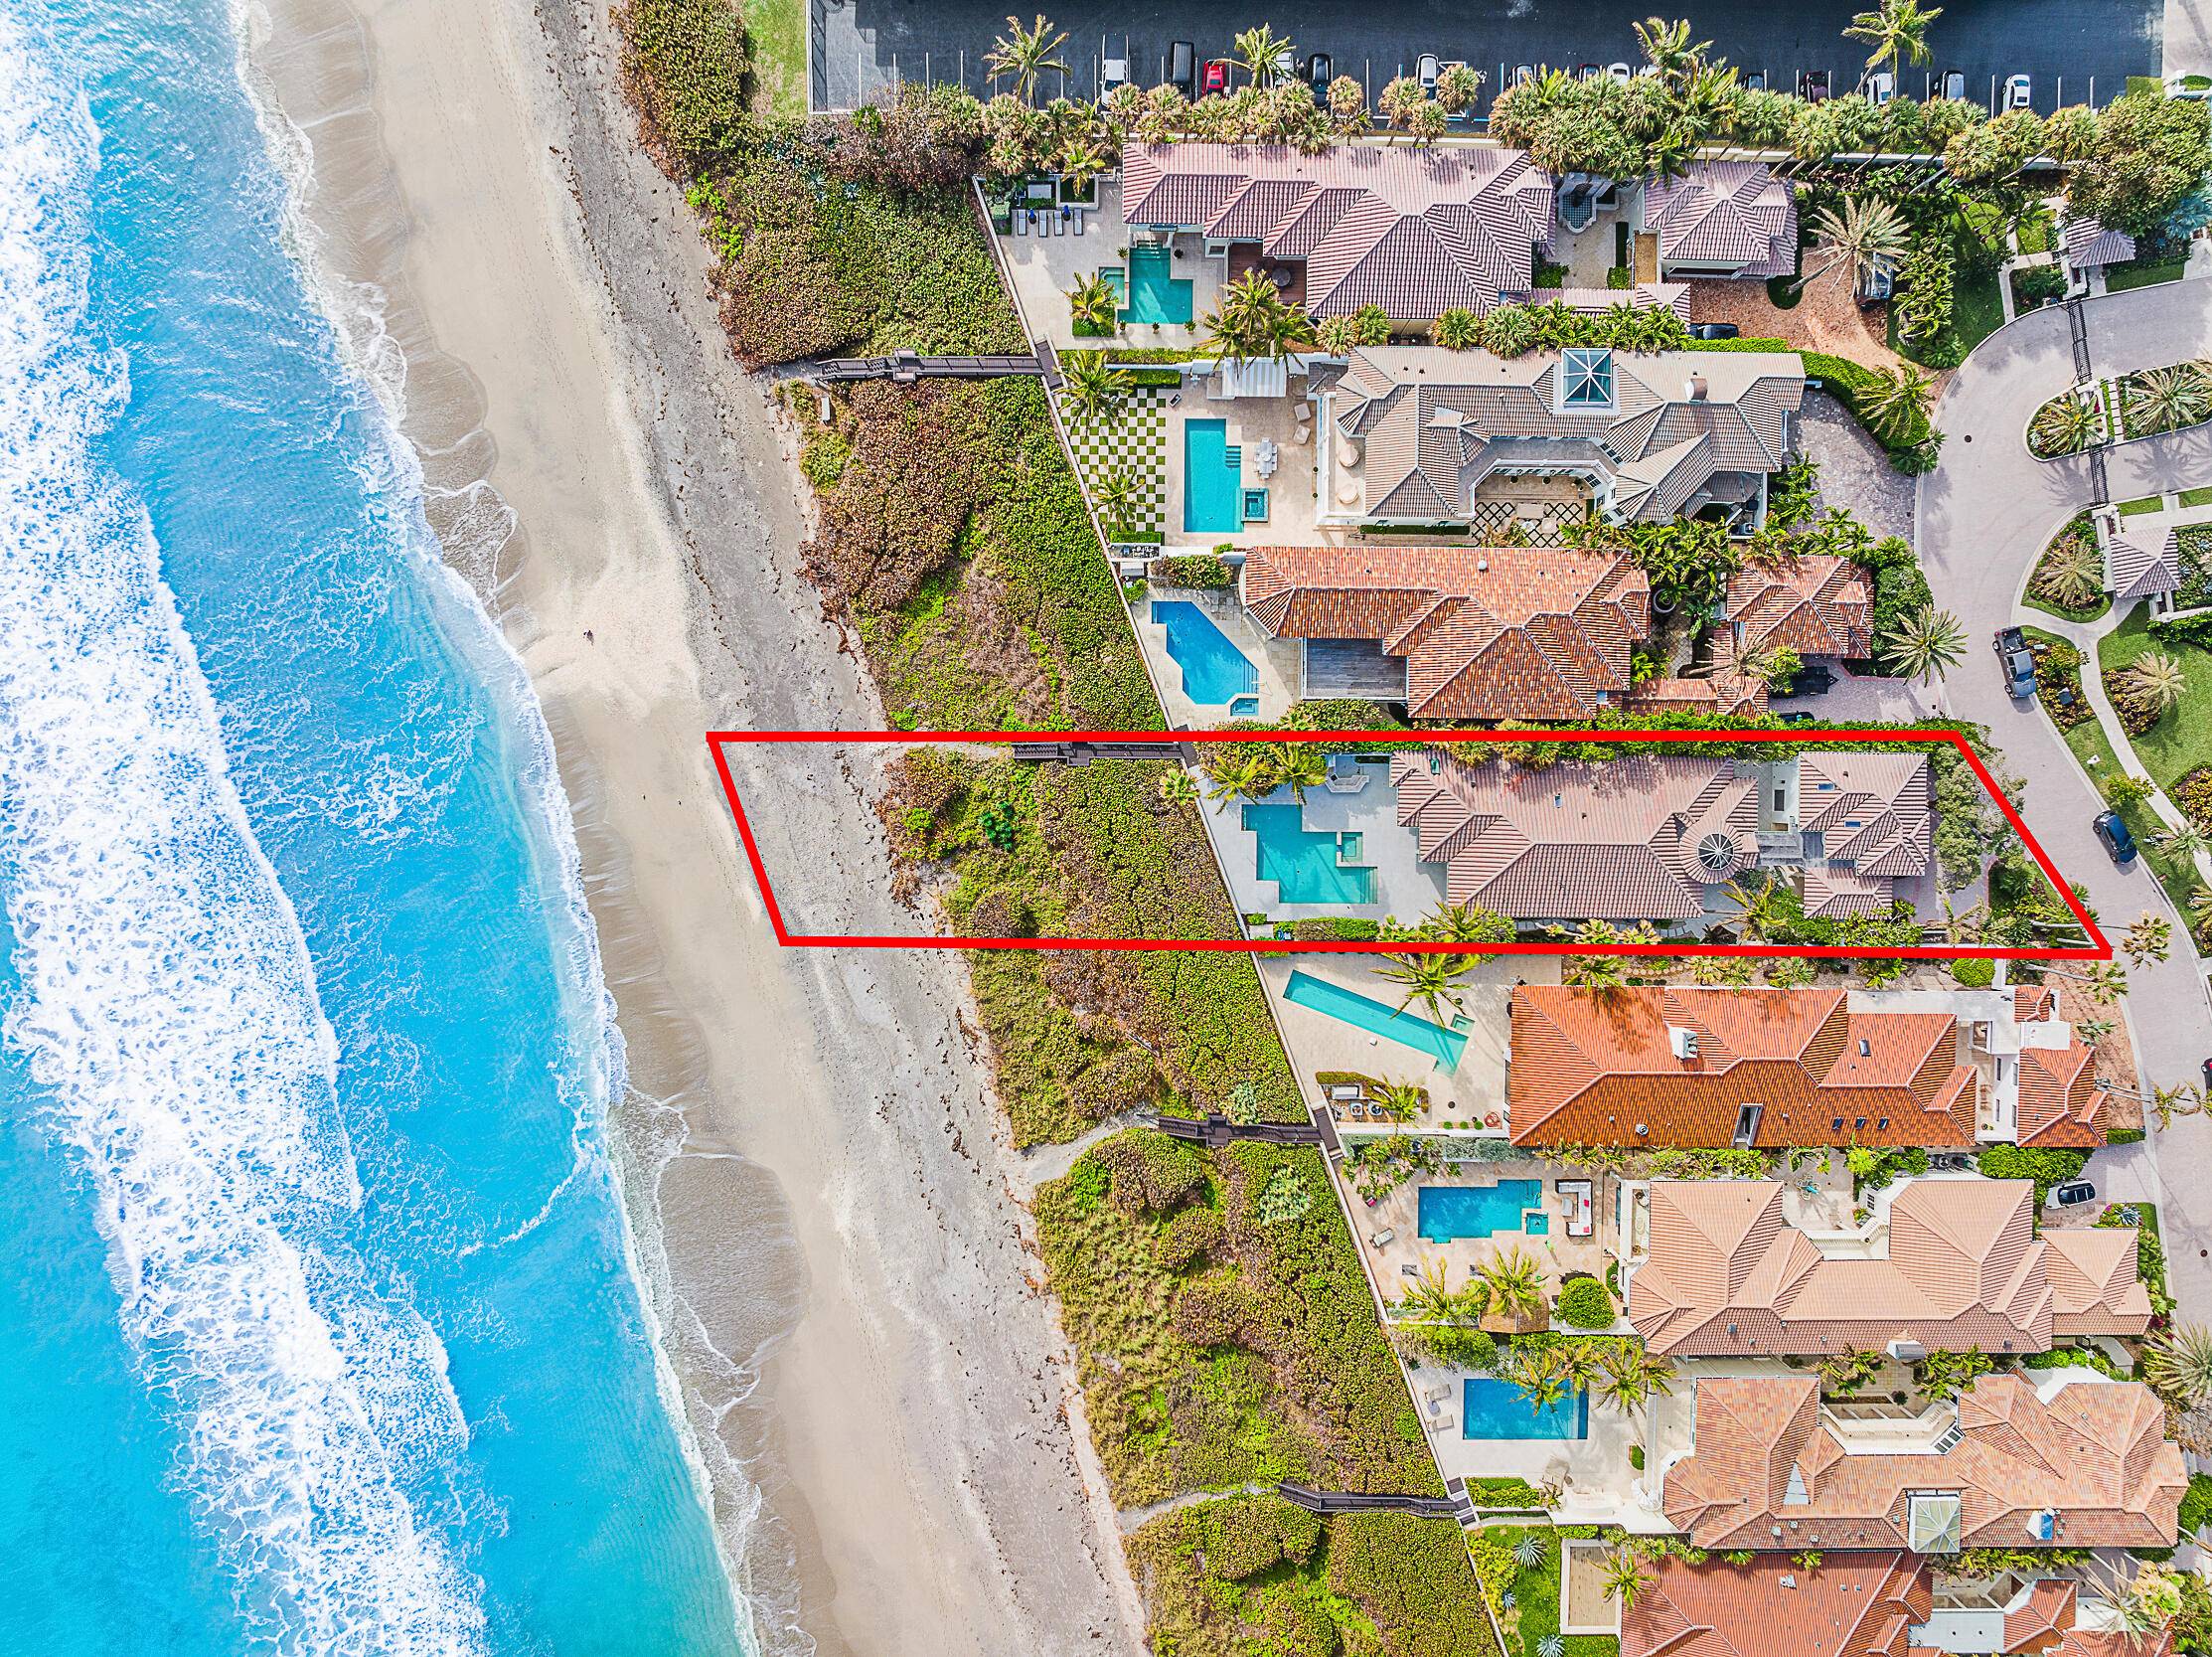 Beach Oasis Seven Hundred Ocean is a quiet enclave of 10 homes directly on the sand and Atlantic Ocean.